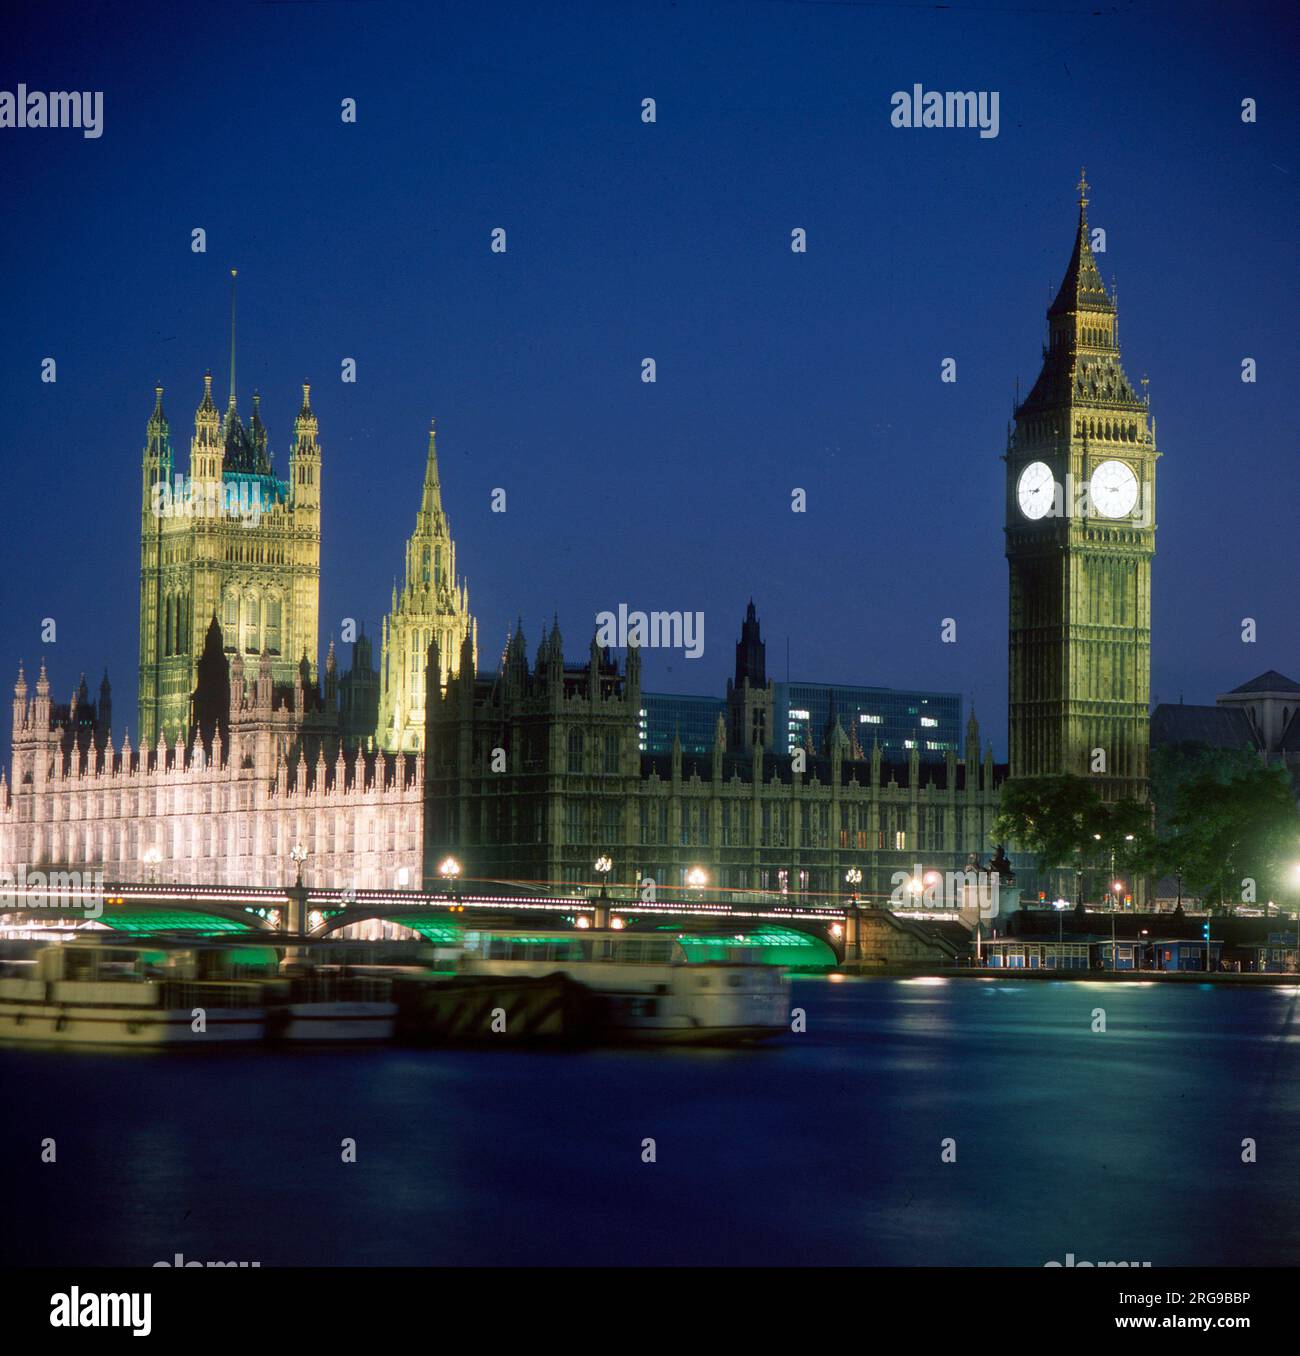 The Houses of Parliament, Westminster Bridge over the River Thames and Big Ben at Night Stock Photo